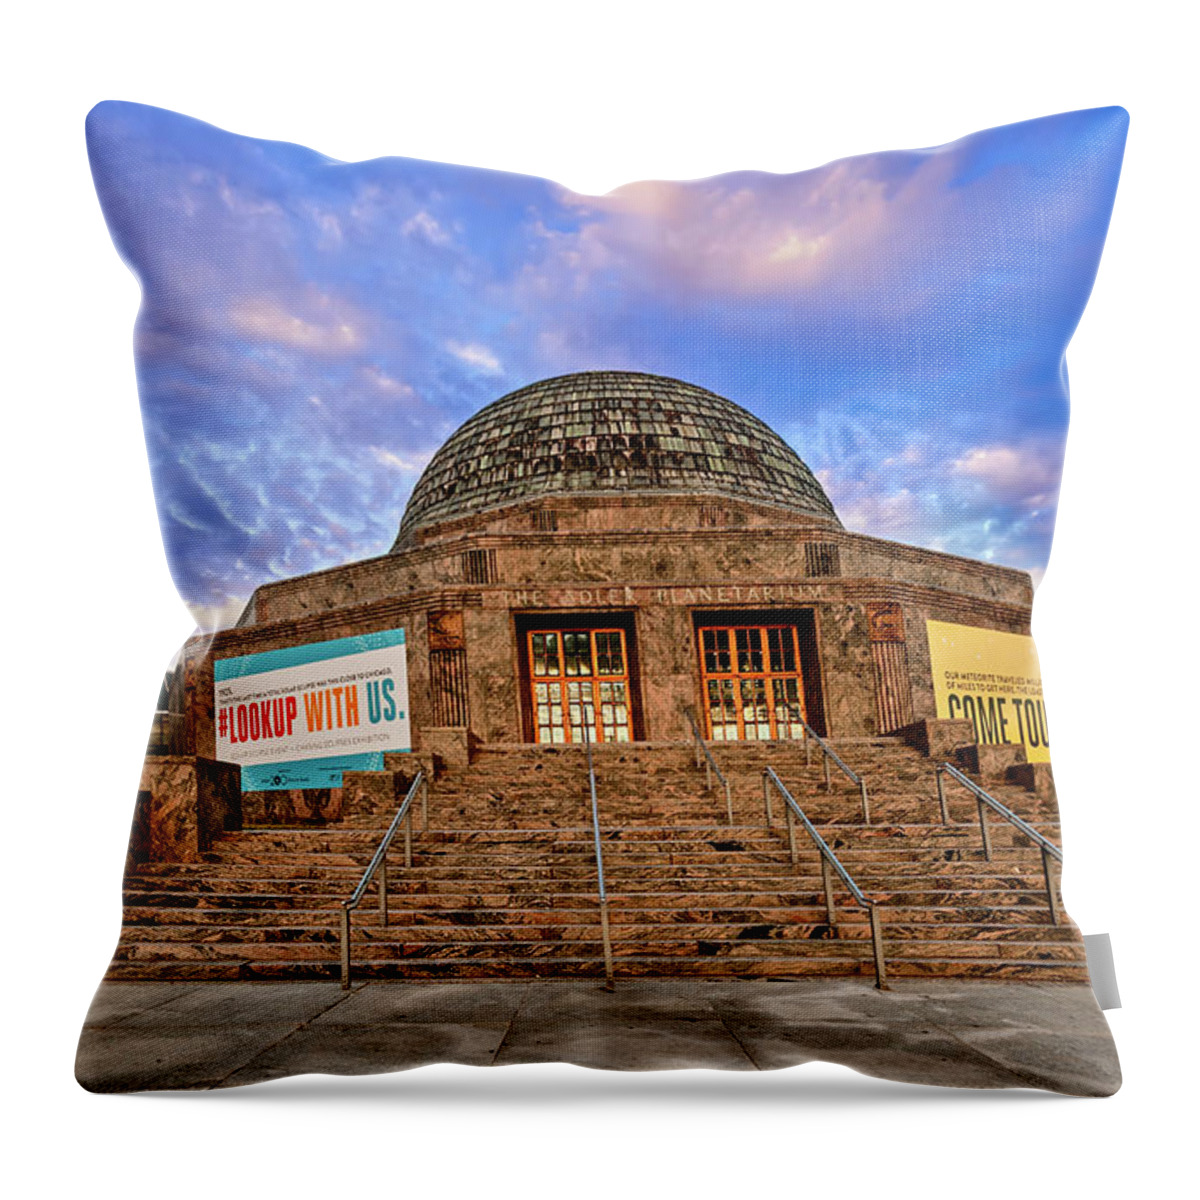 Adler Planetarium Throw Pillow featuring the photograph Adler Planetarium at Sunset by Mitchell R Grosky